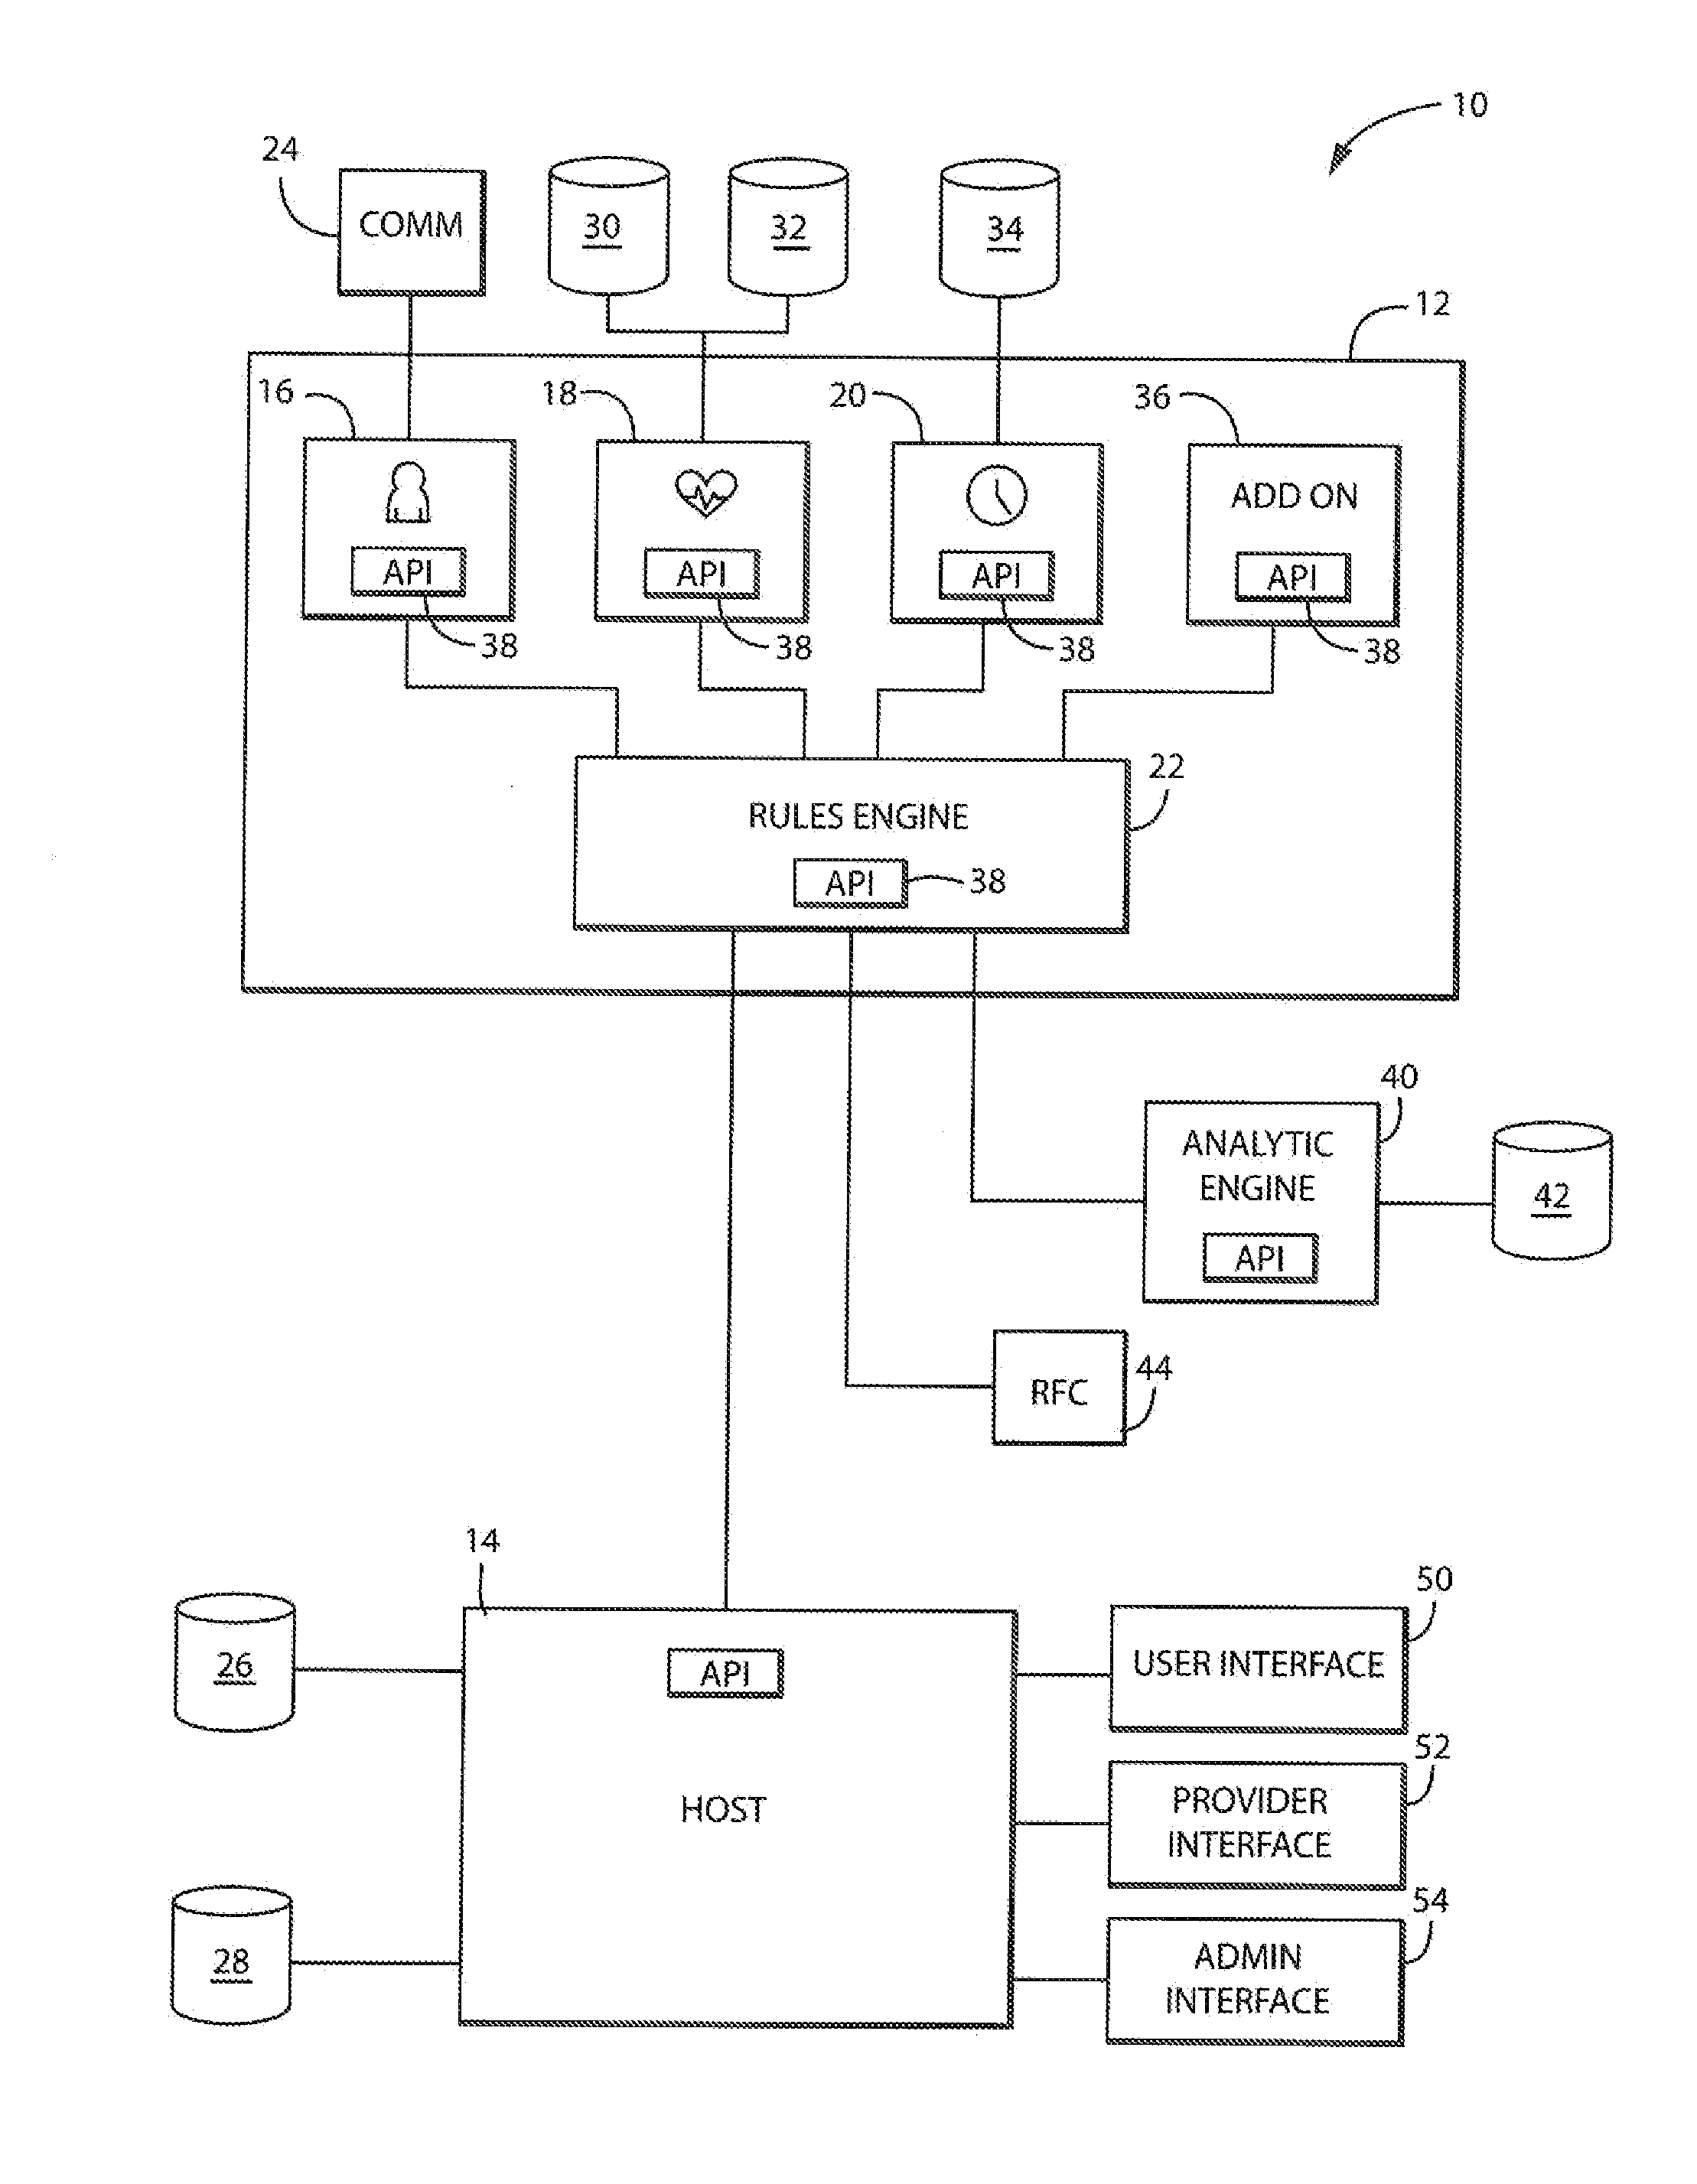 System for Electronically Administering Health Services